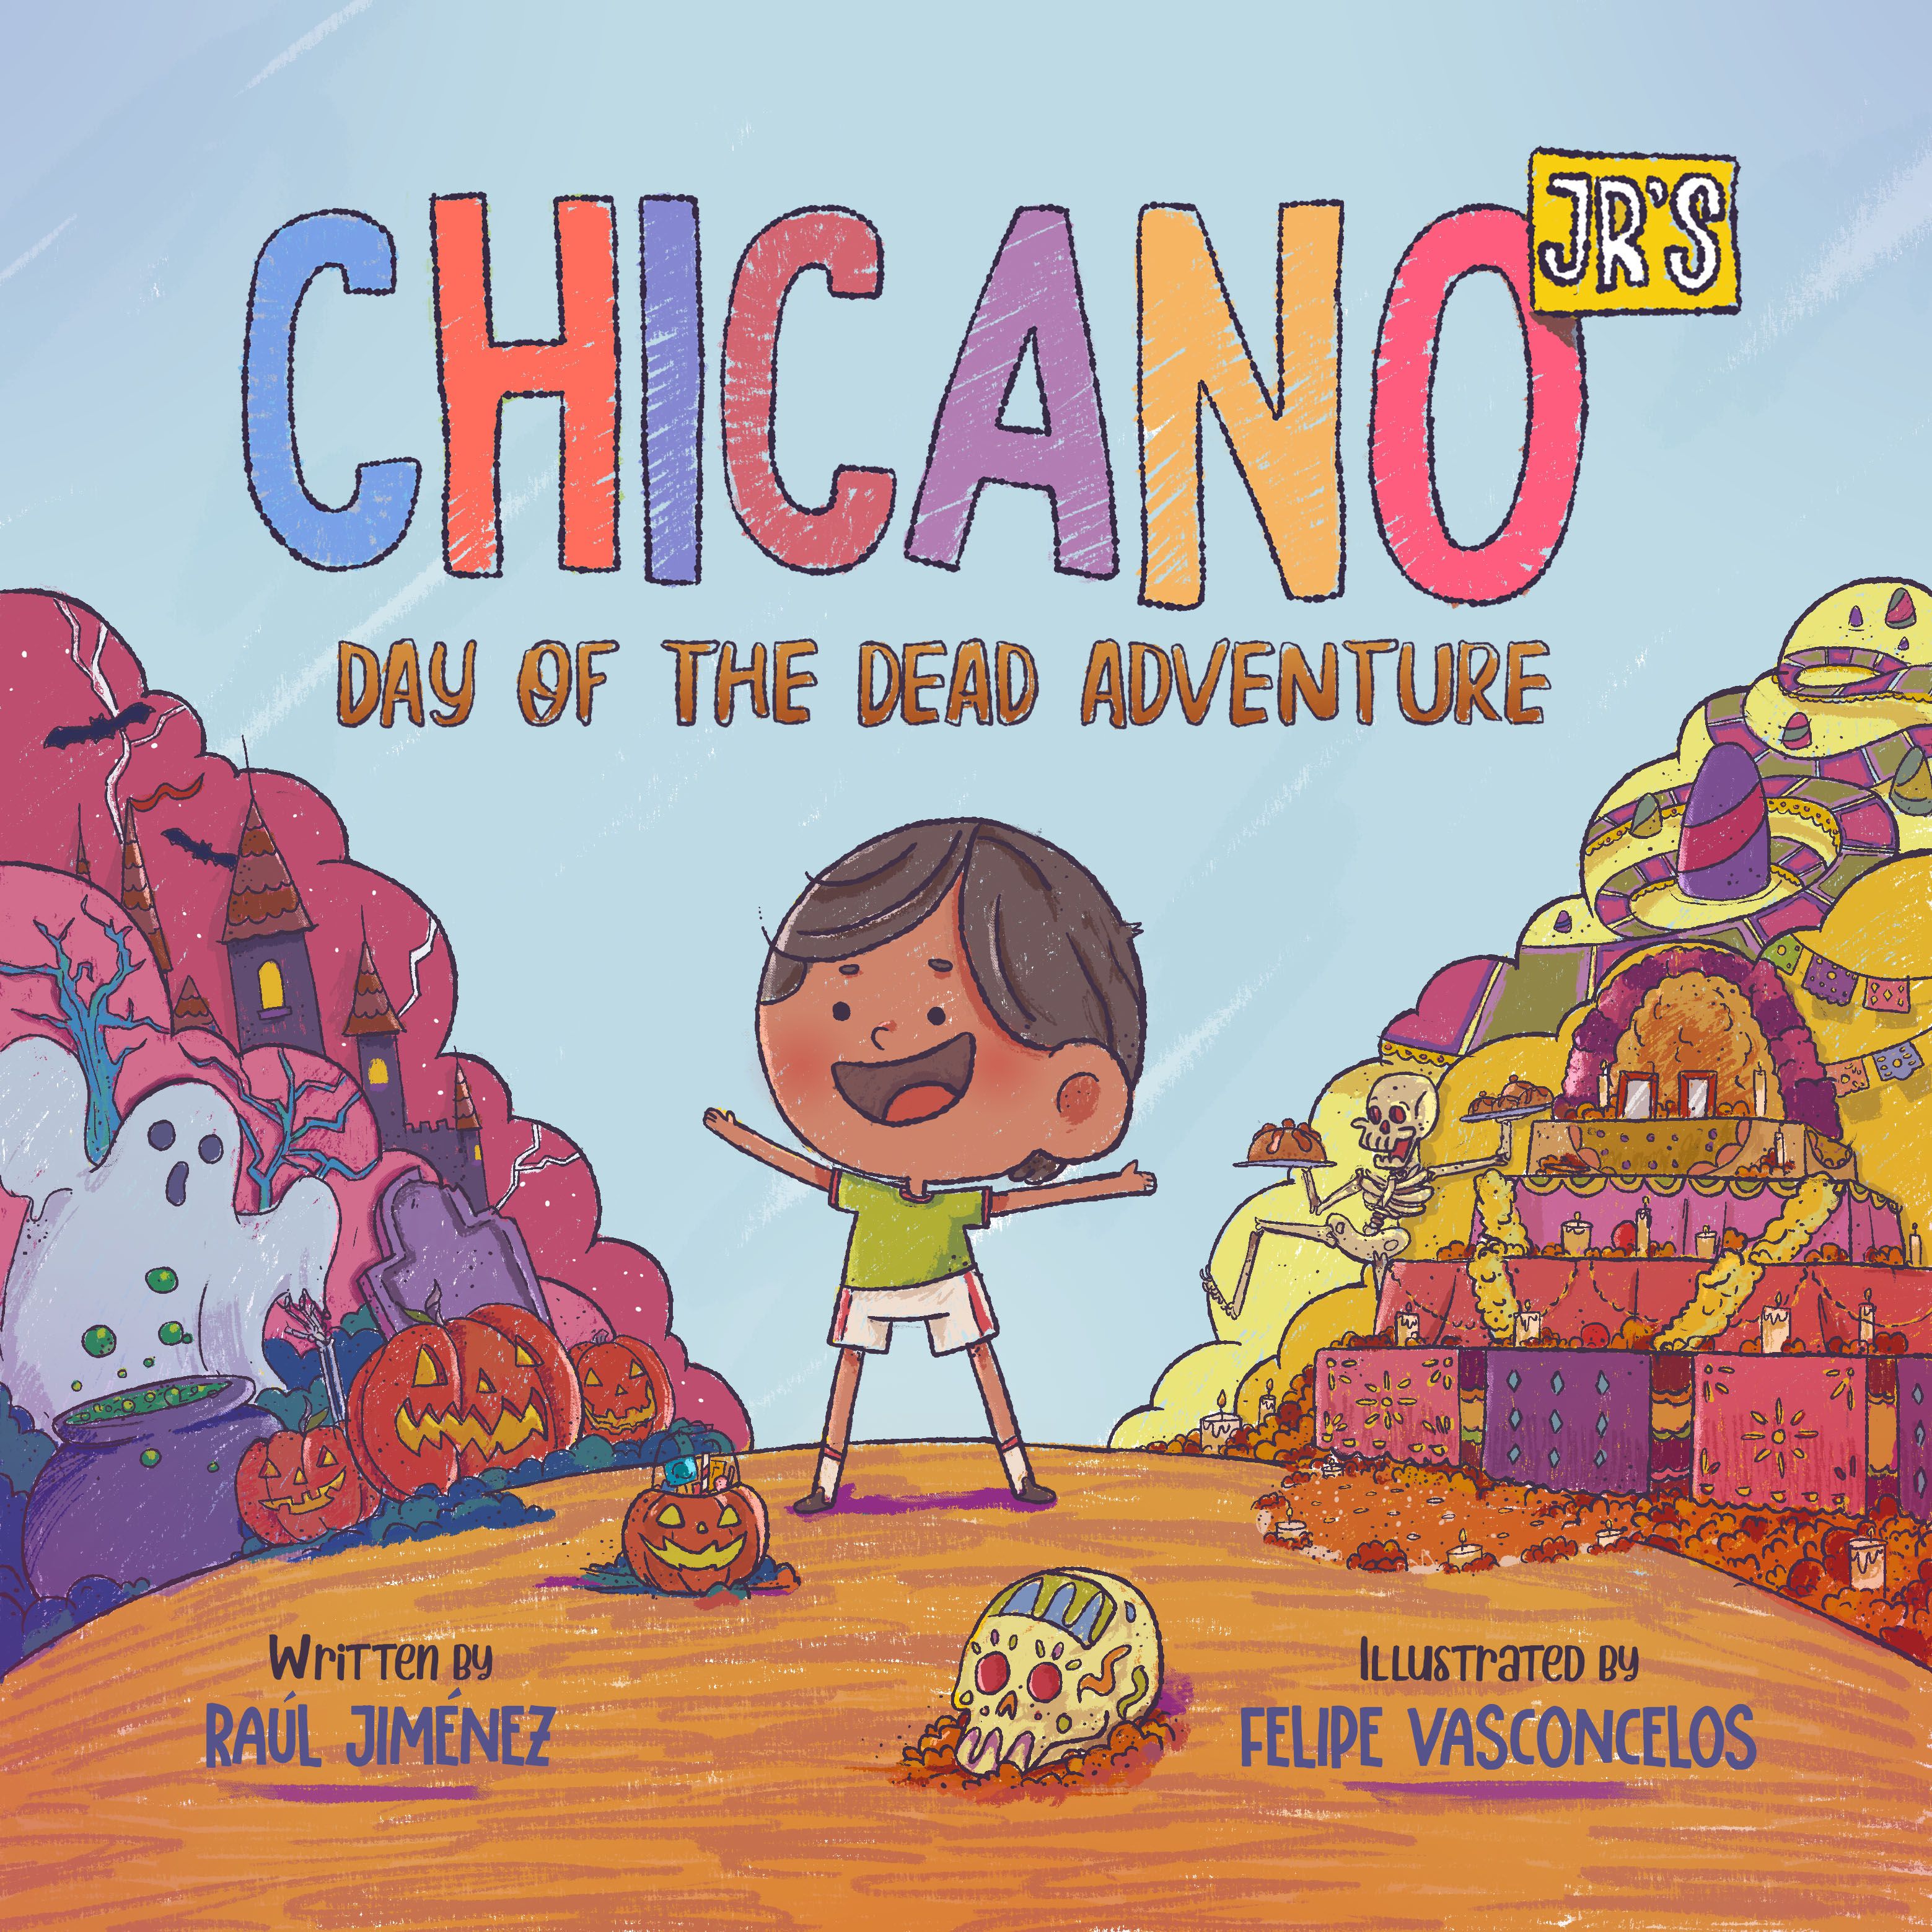 Chicano Jr"s Day of the Dead Adventure